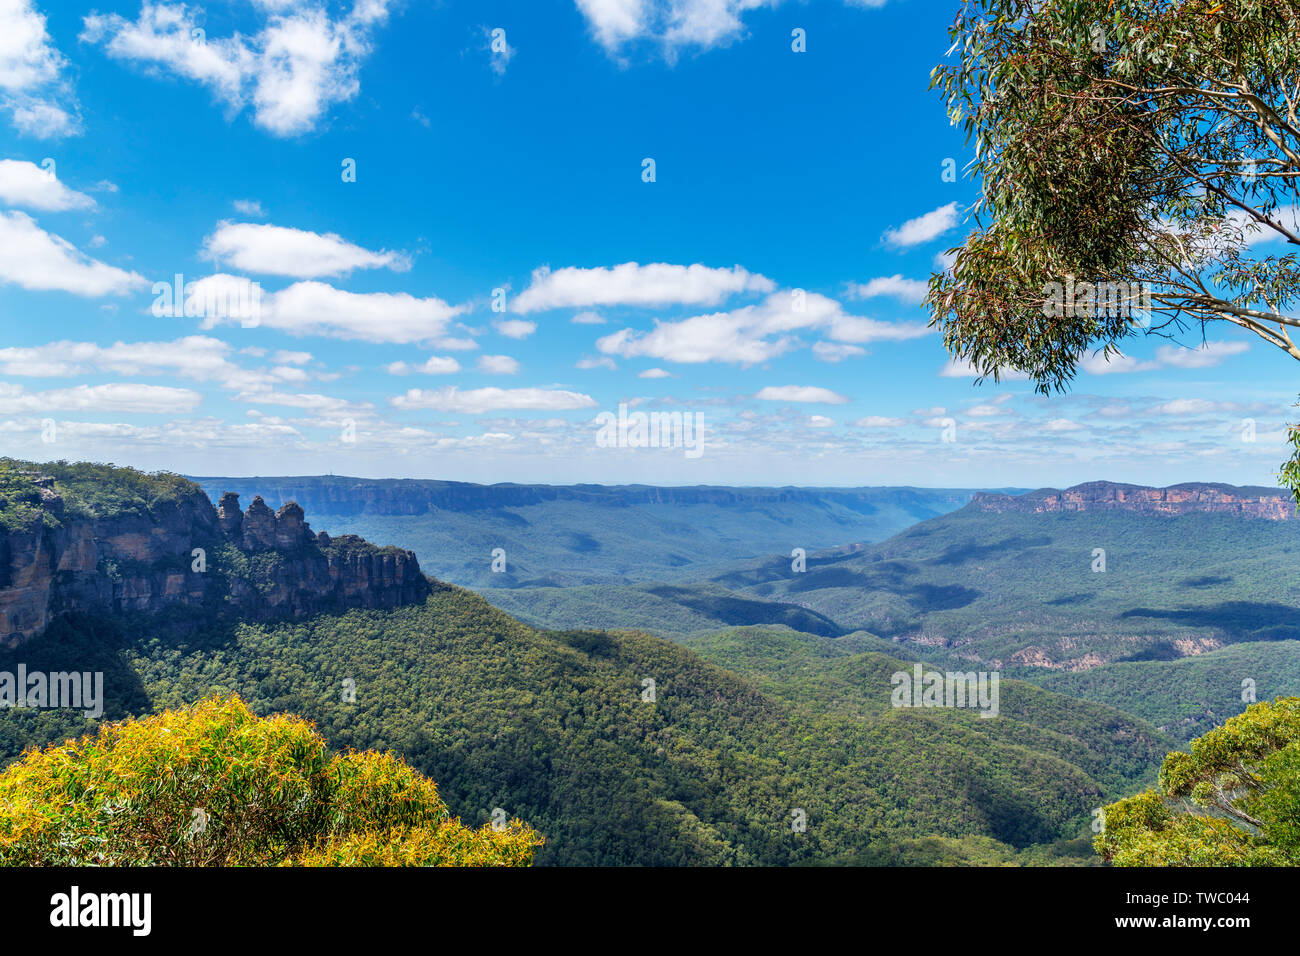 View over the Blue Mountains towards The Three Sisters from Malaita Lookout, Katoomba, New South Wales, Australia Stock Photo